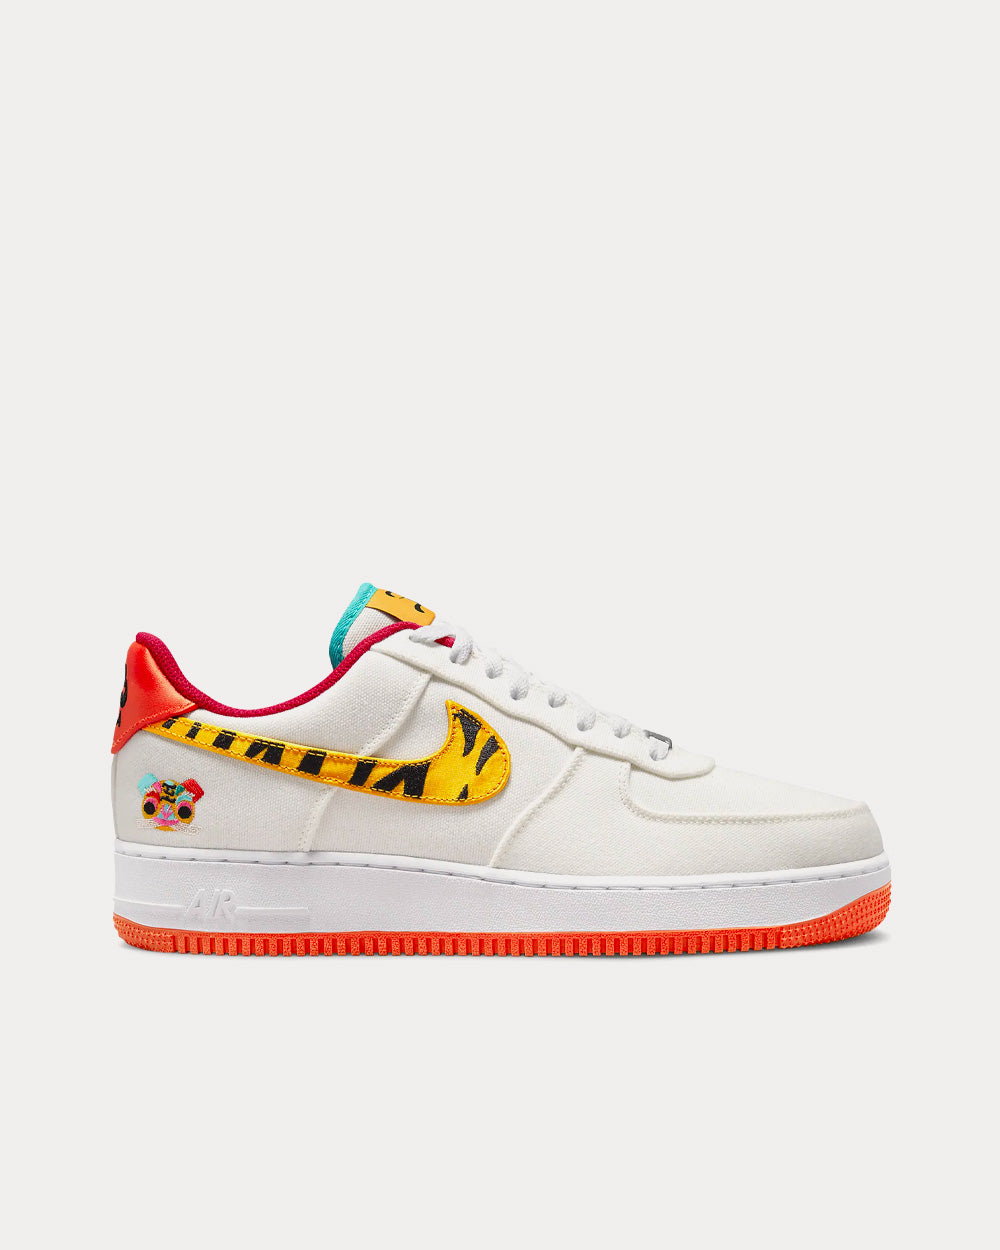 Air Force 1 '07 LV8 Sail / White / University Gold / University Gold Low  Top Sneakers